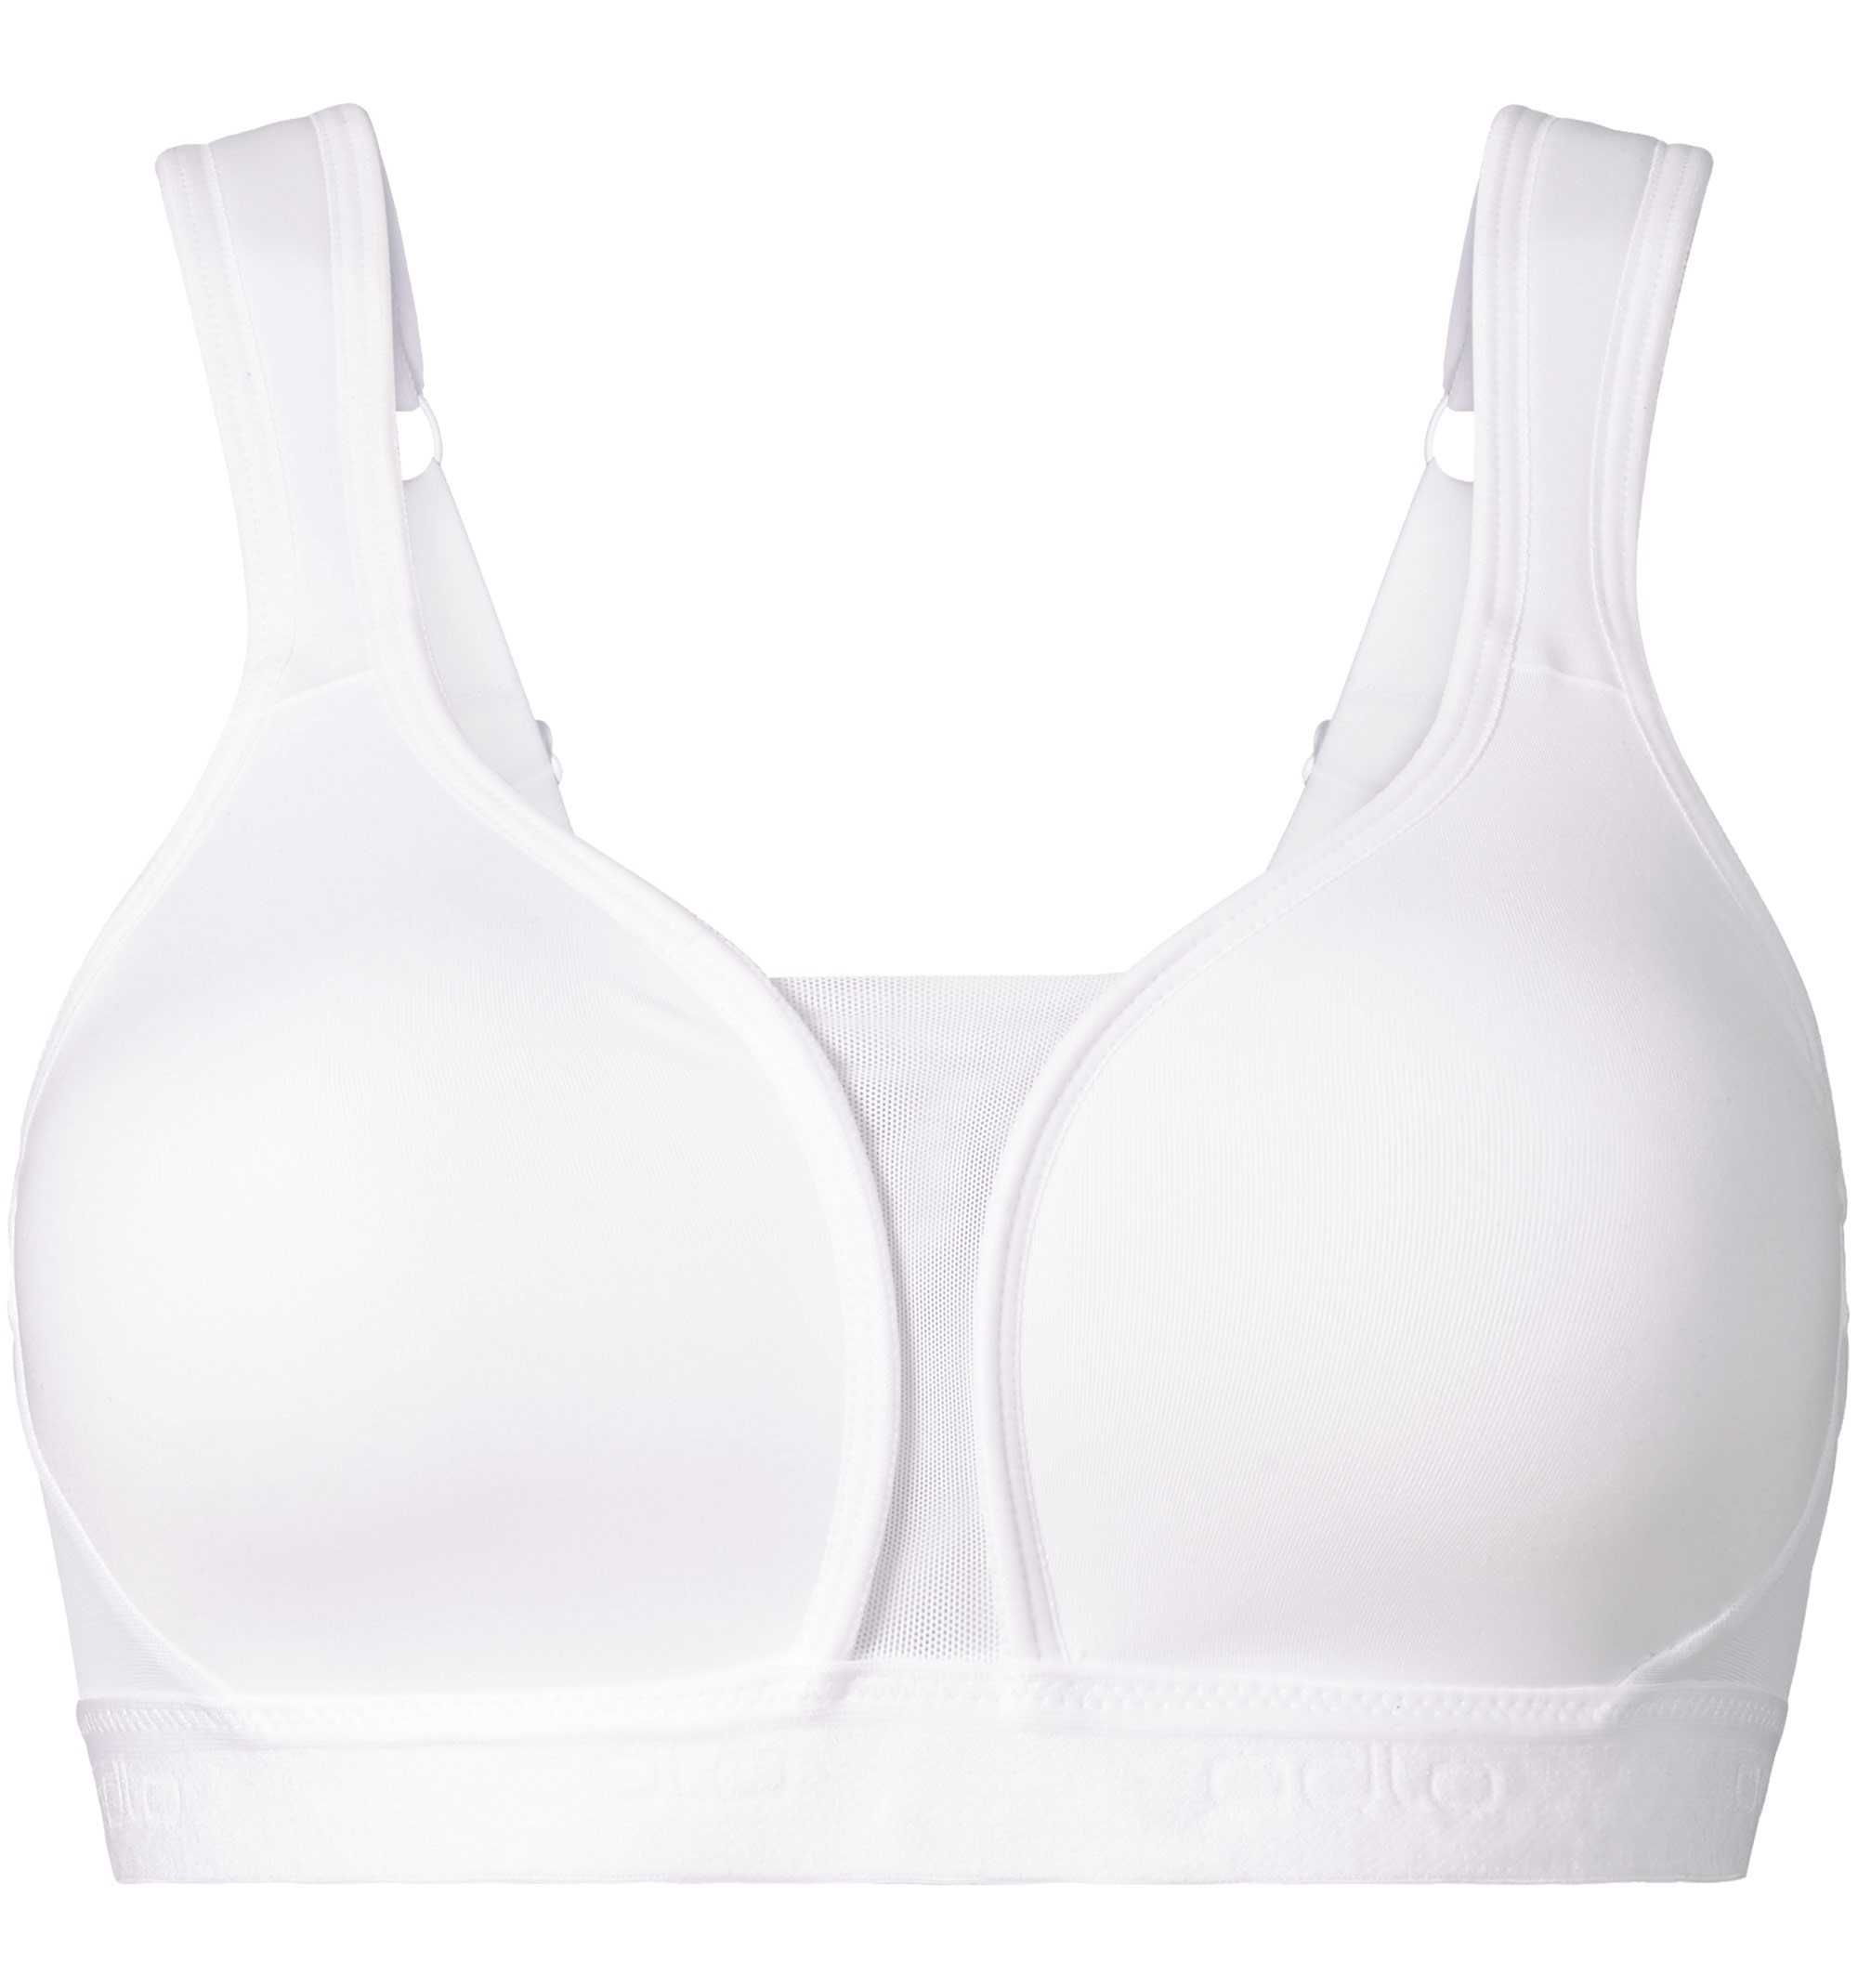 Soutien-gorge Padded High - Blanc